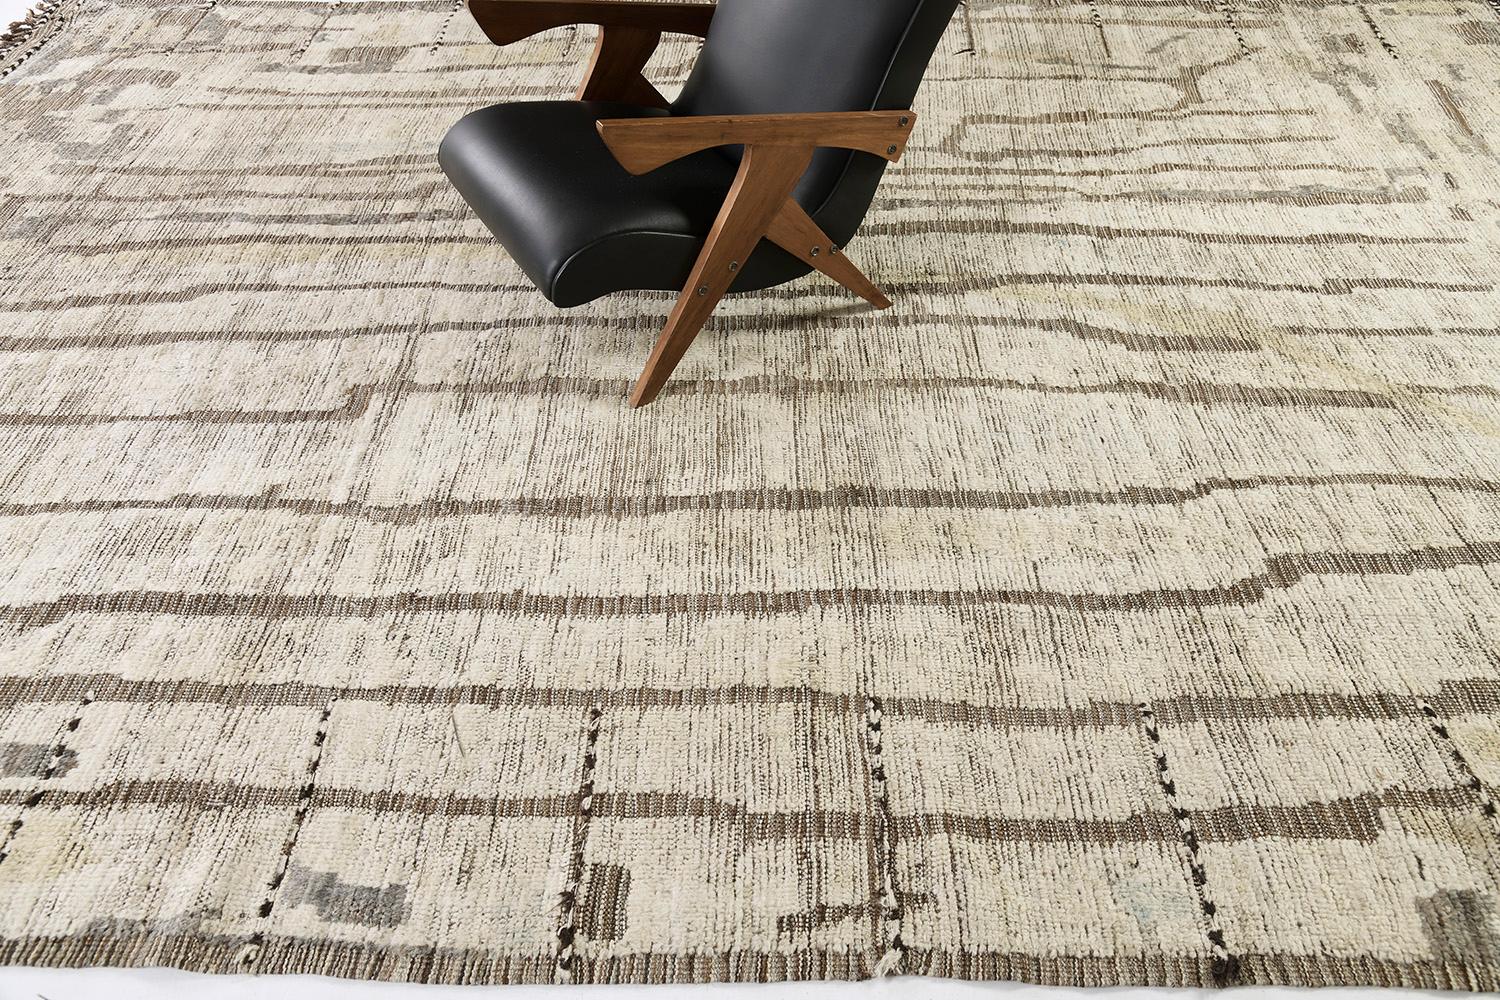 Berberis is an interplay between neutral tones and soothing gold stains into a modern-day interpretation of the Moroccan world. This rug's play of textures, linework, and simplicity is what makes the Atlas Collection so unique and sought after.